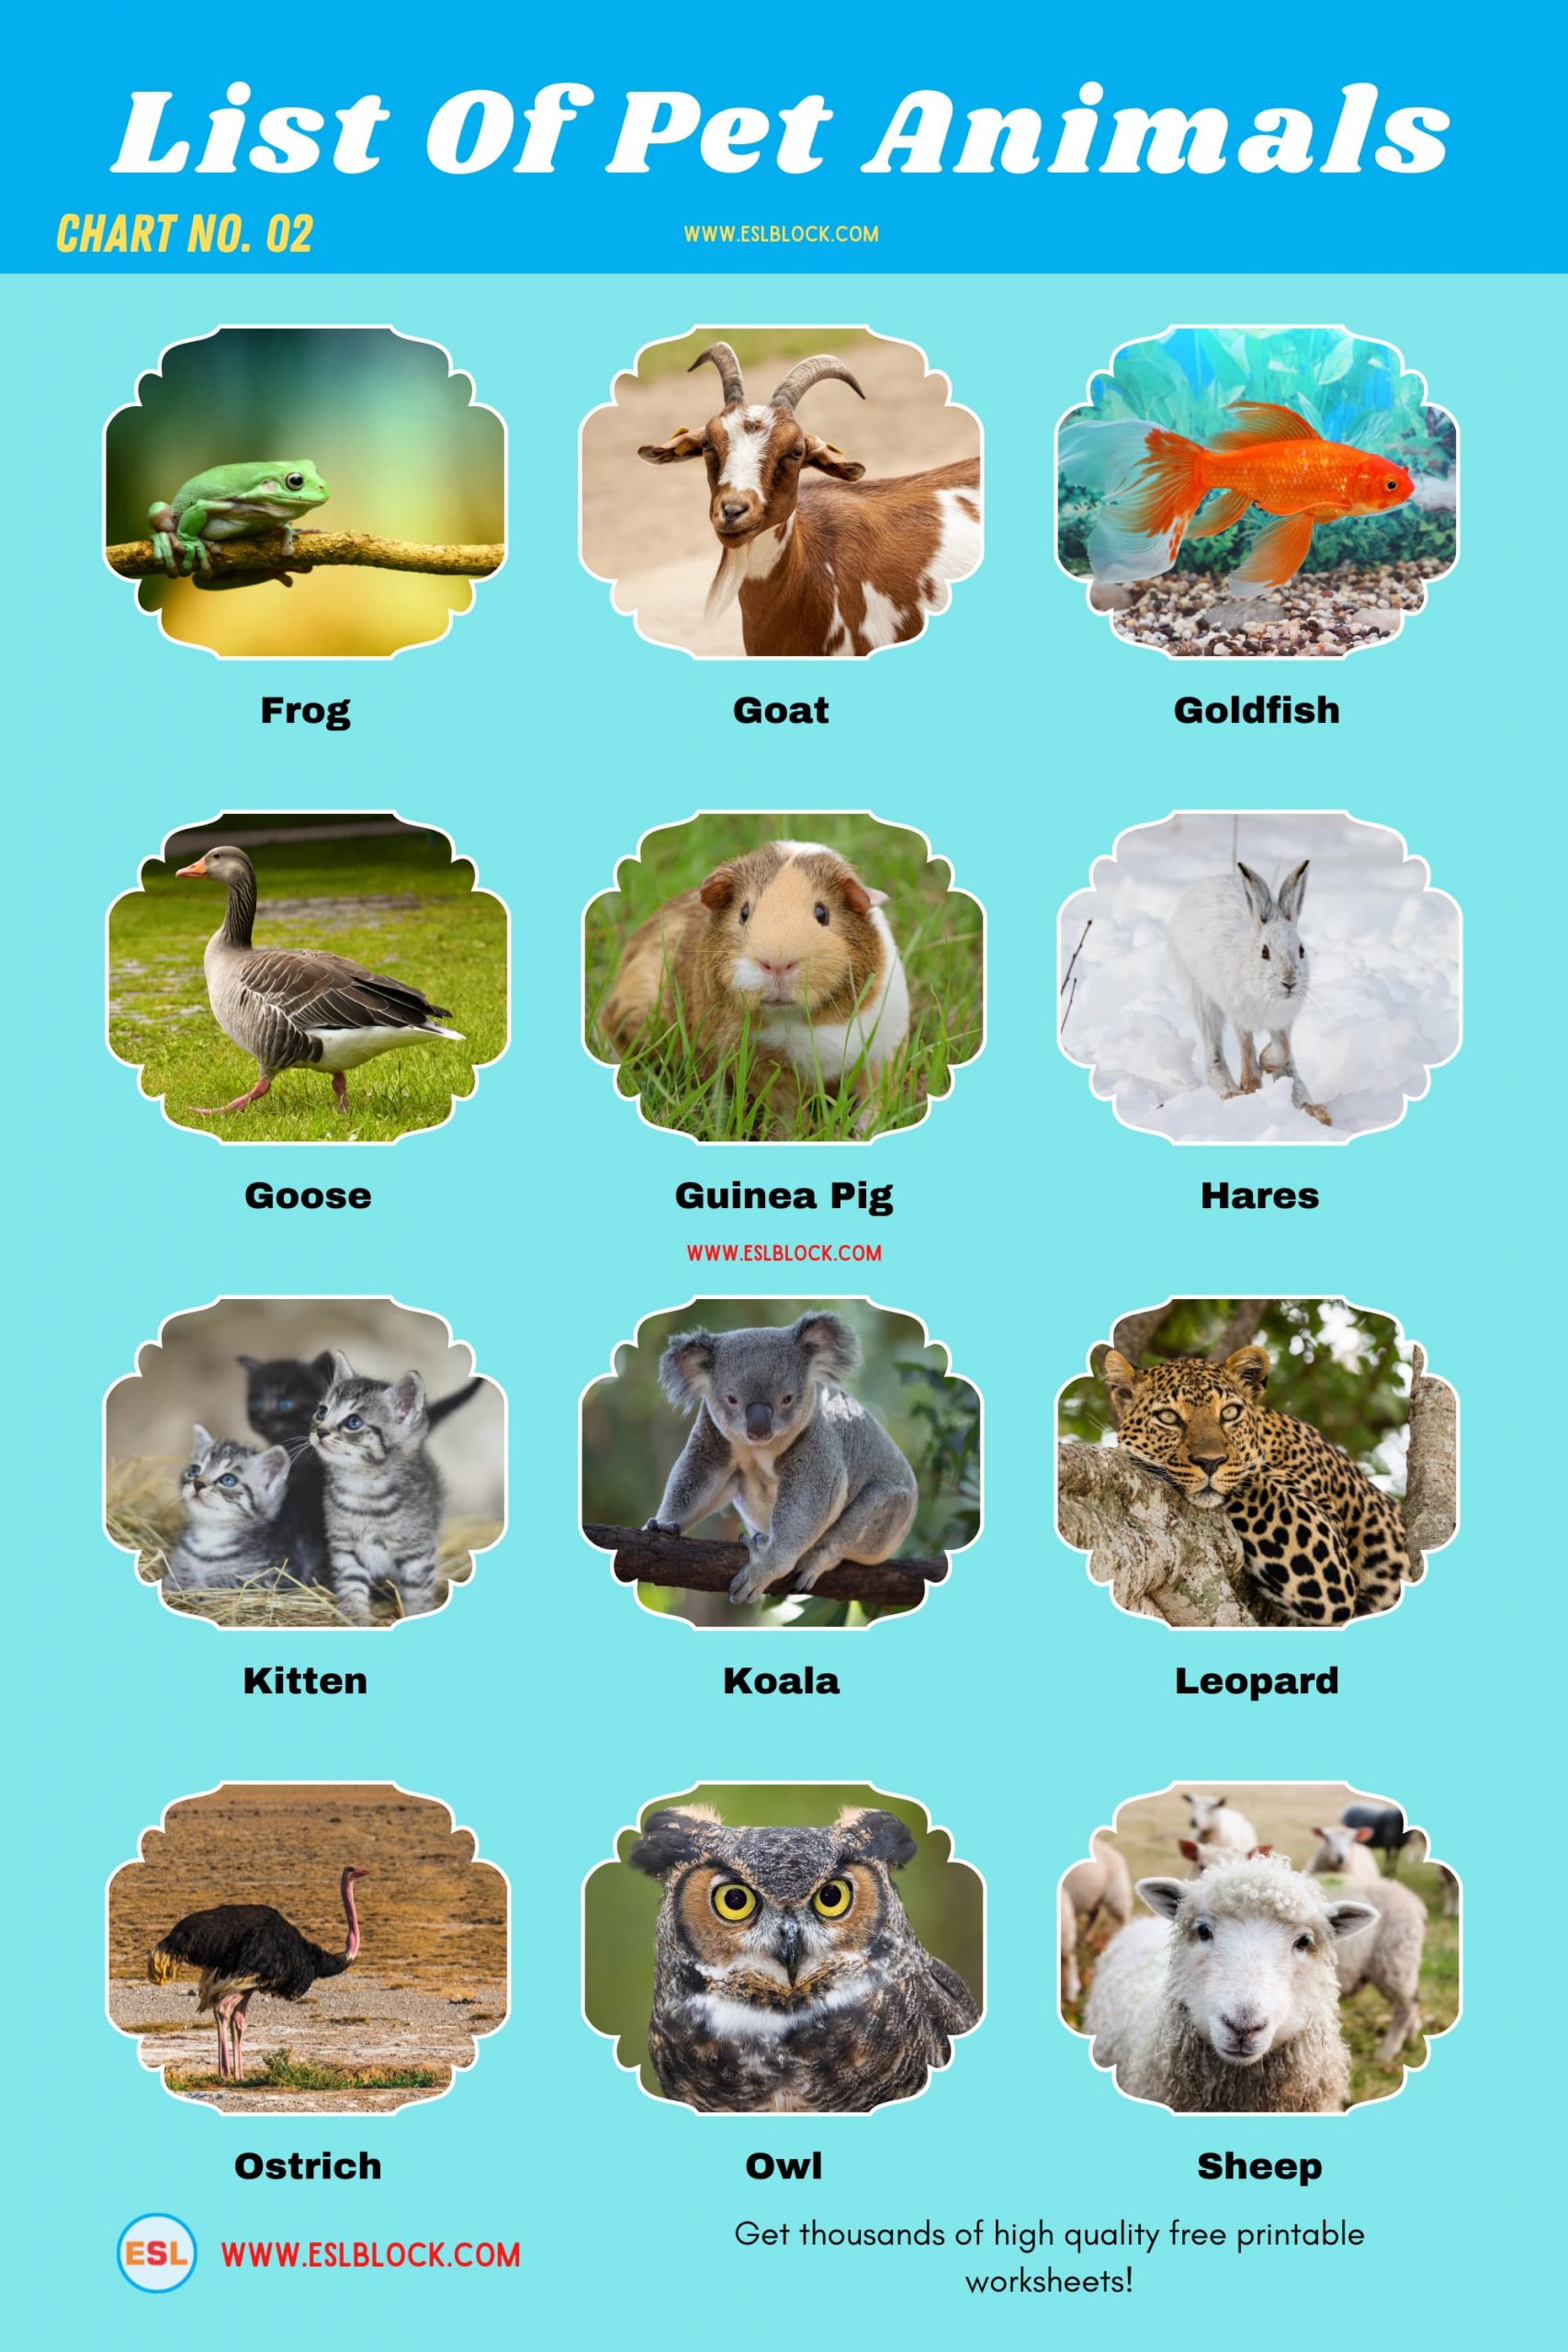 Animals Names, Best pet animals, Big pets, Cute pets, Different Types of pets, English, English Nouns, English Vocabulary, English Words, List of cute pets, Medium pet animals, Nouns, Pet animals, Pets List, Small pets, Vocabulary